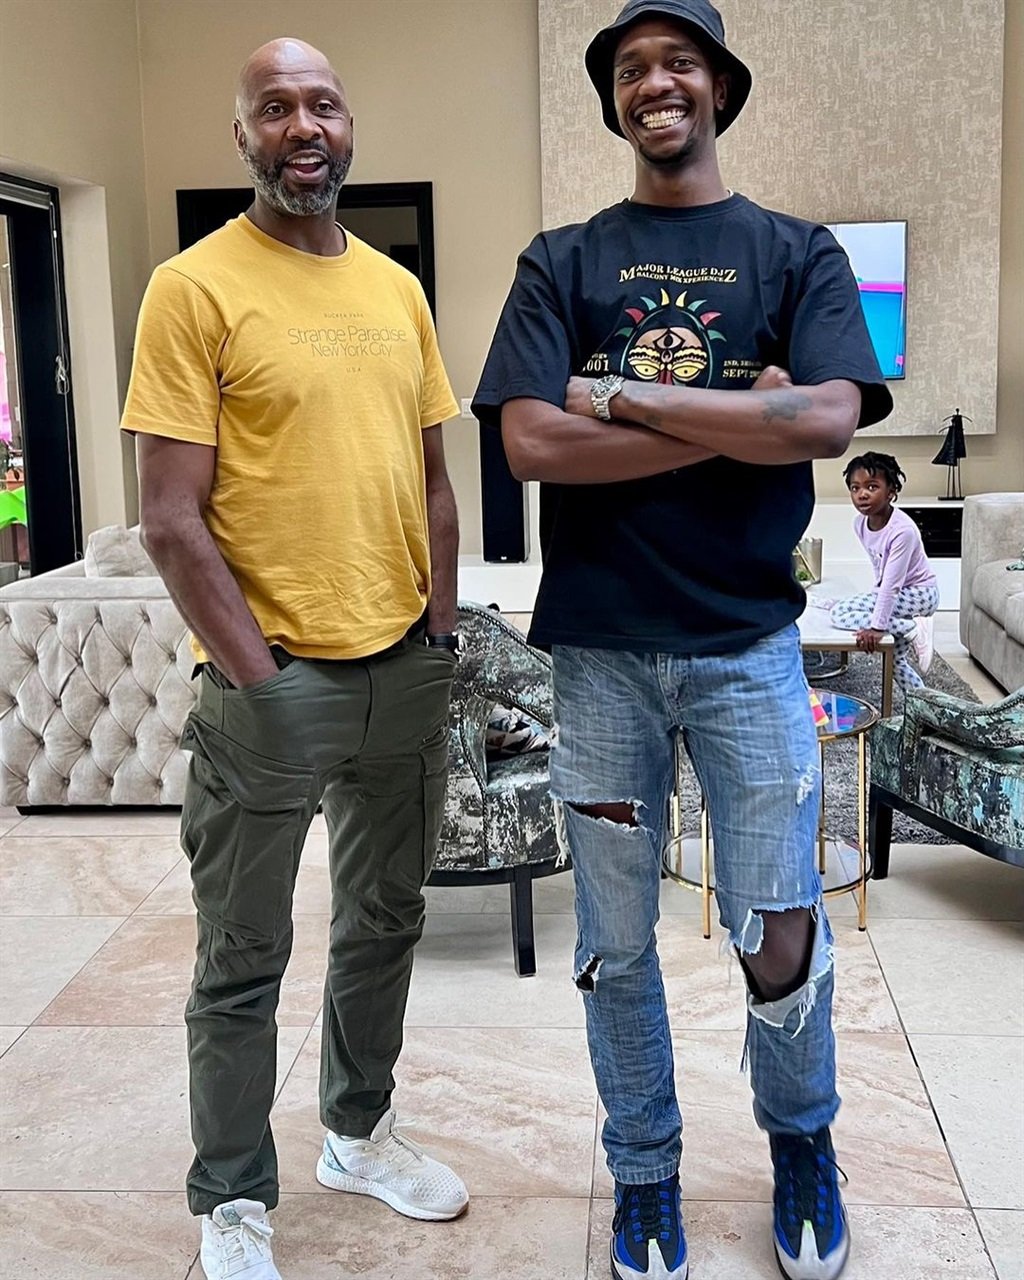 Lucas Radebe's oldest son, Primo reminisced over t